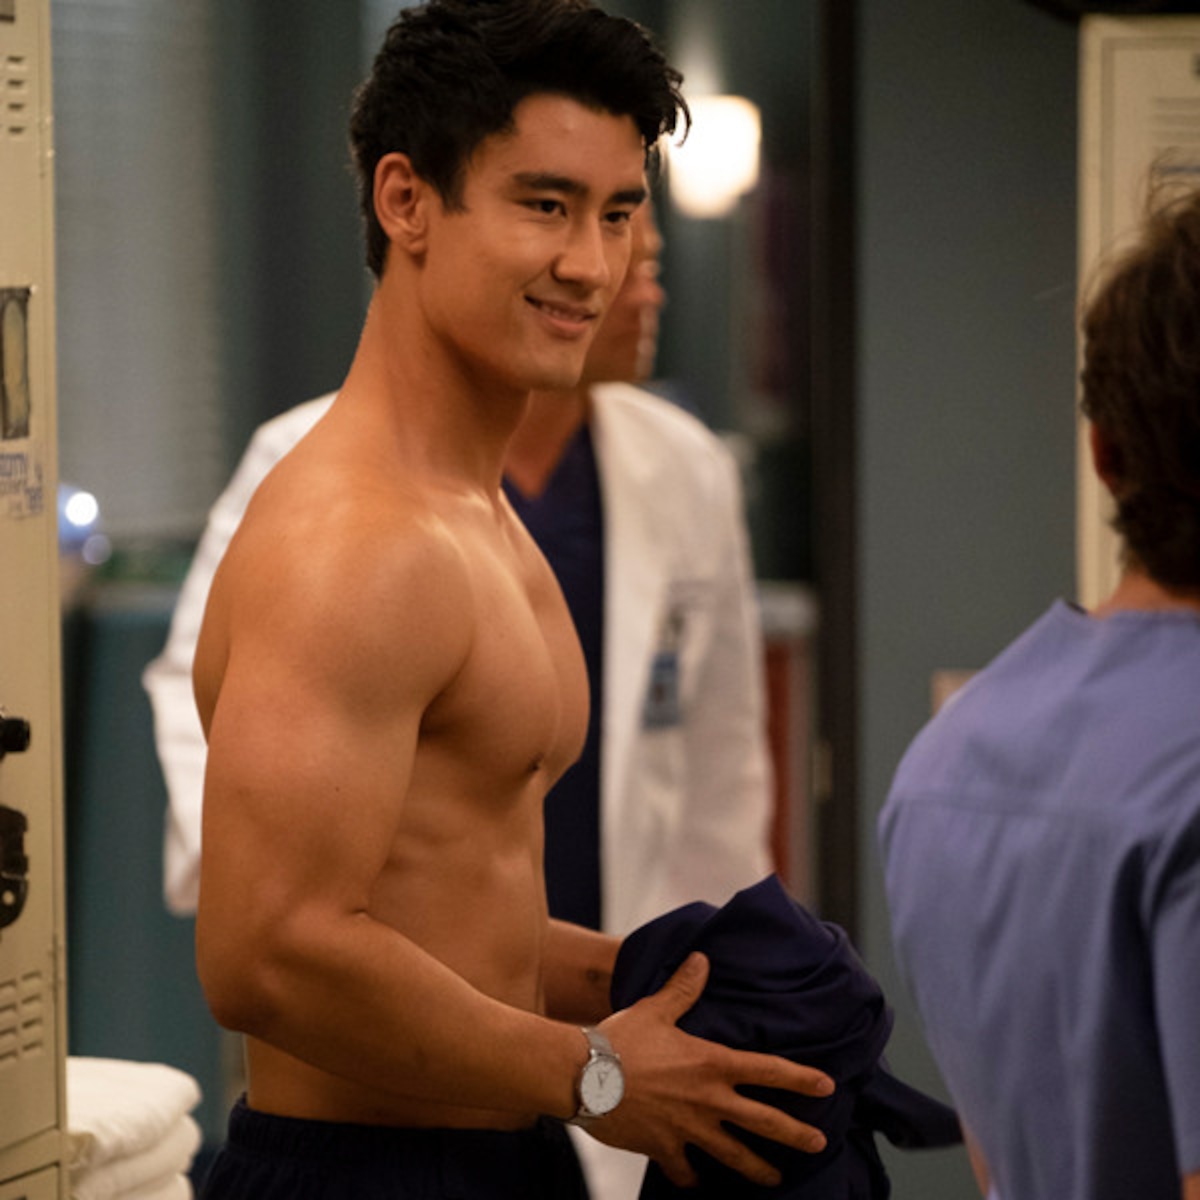 Take Some Time To Appreciate The Hot Shirtless Docs Of Grey'S - E! Online